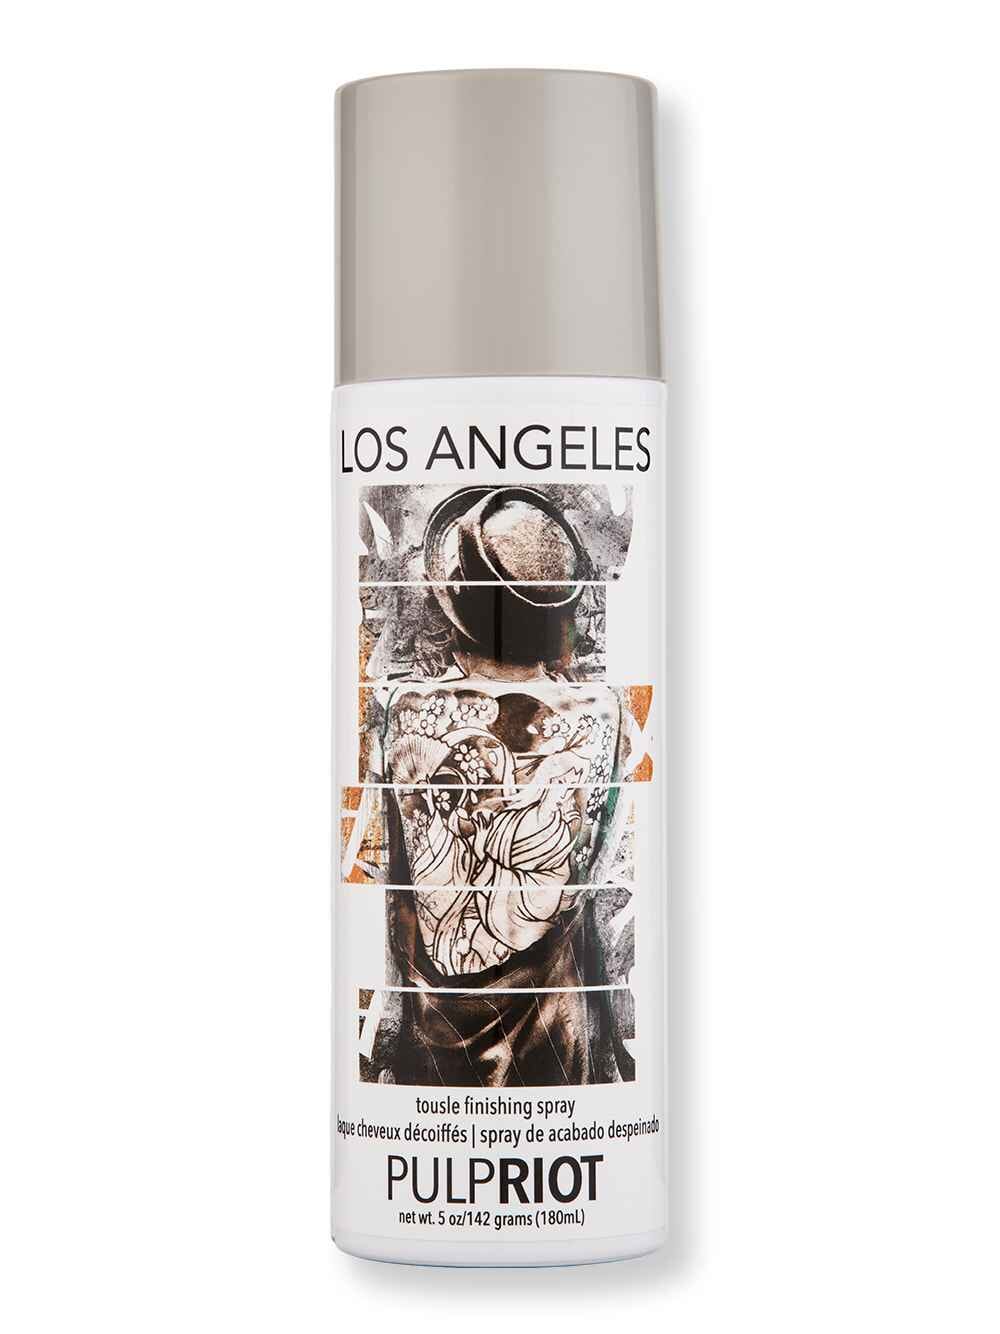 Pulp Riot Pulp Riot Los Angeles Tousle Finishing Spray 5 oz Styling Treatments 